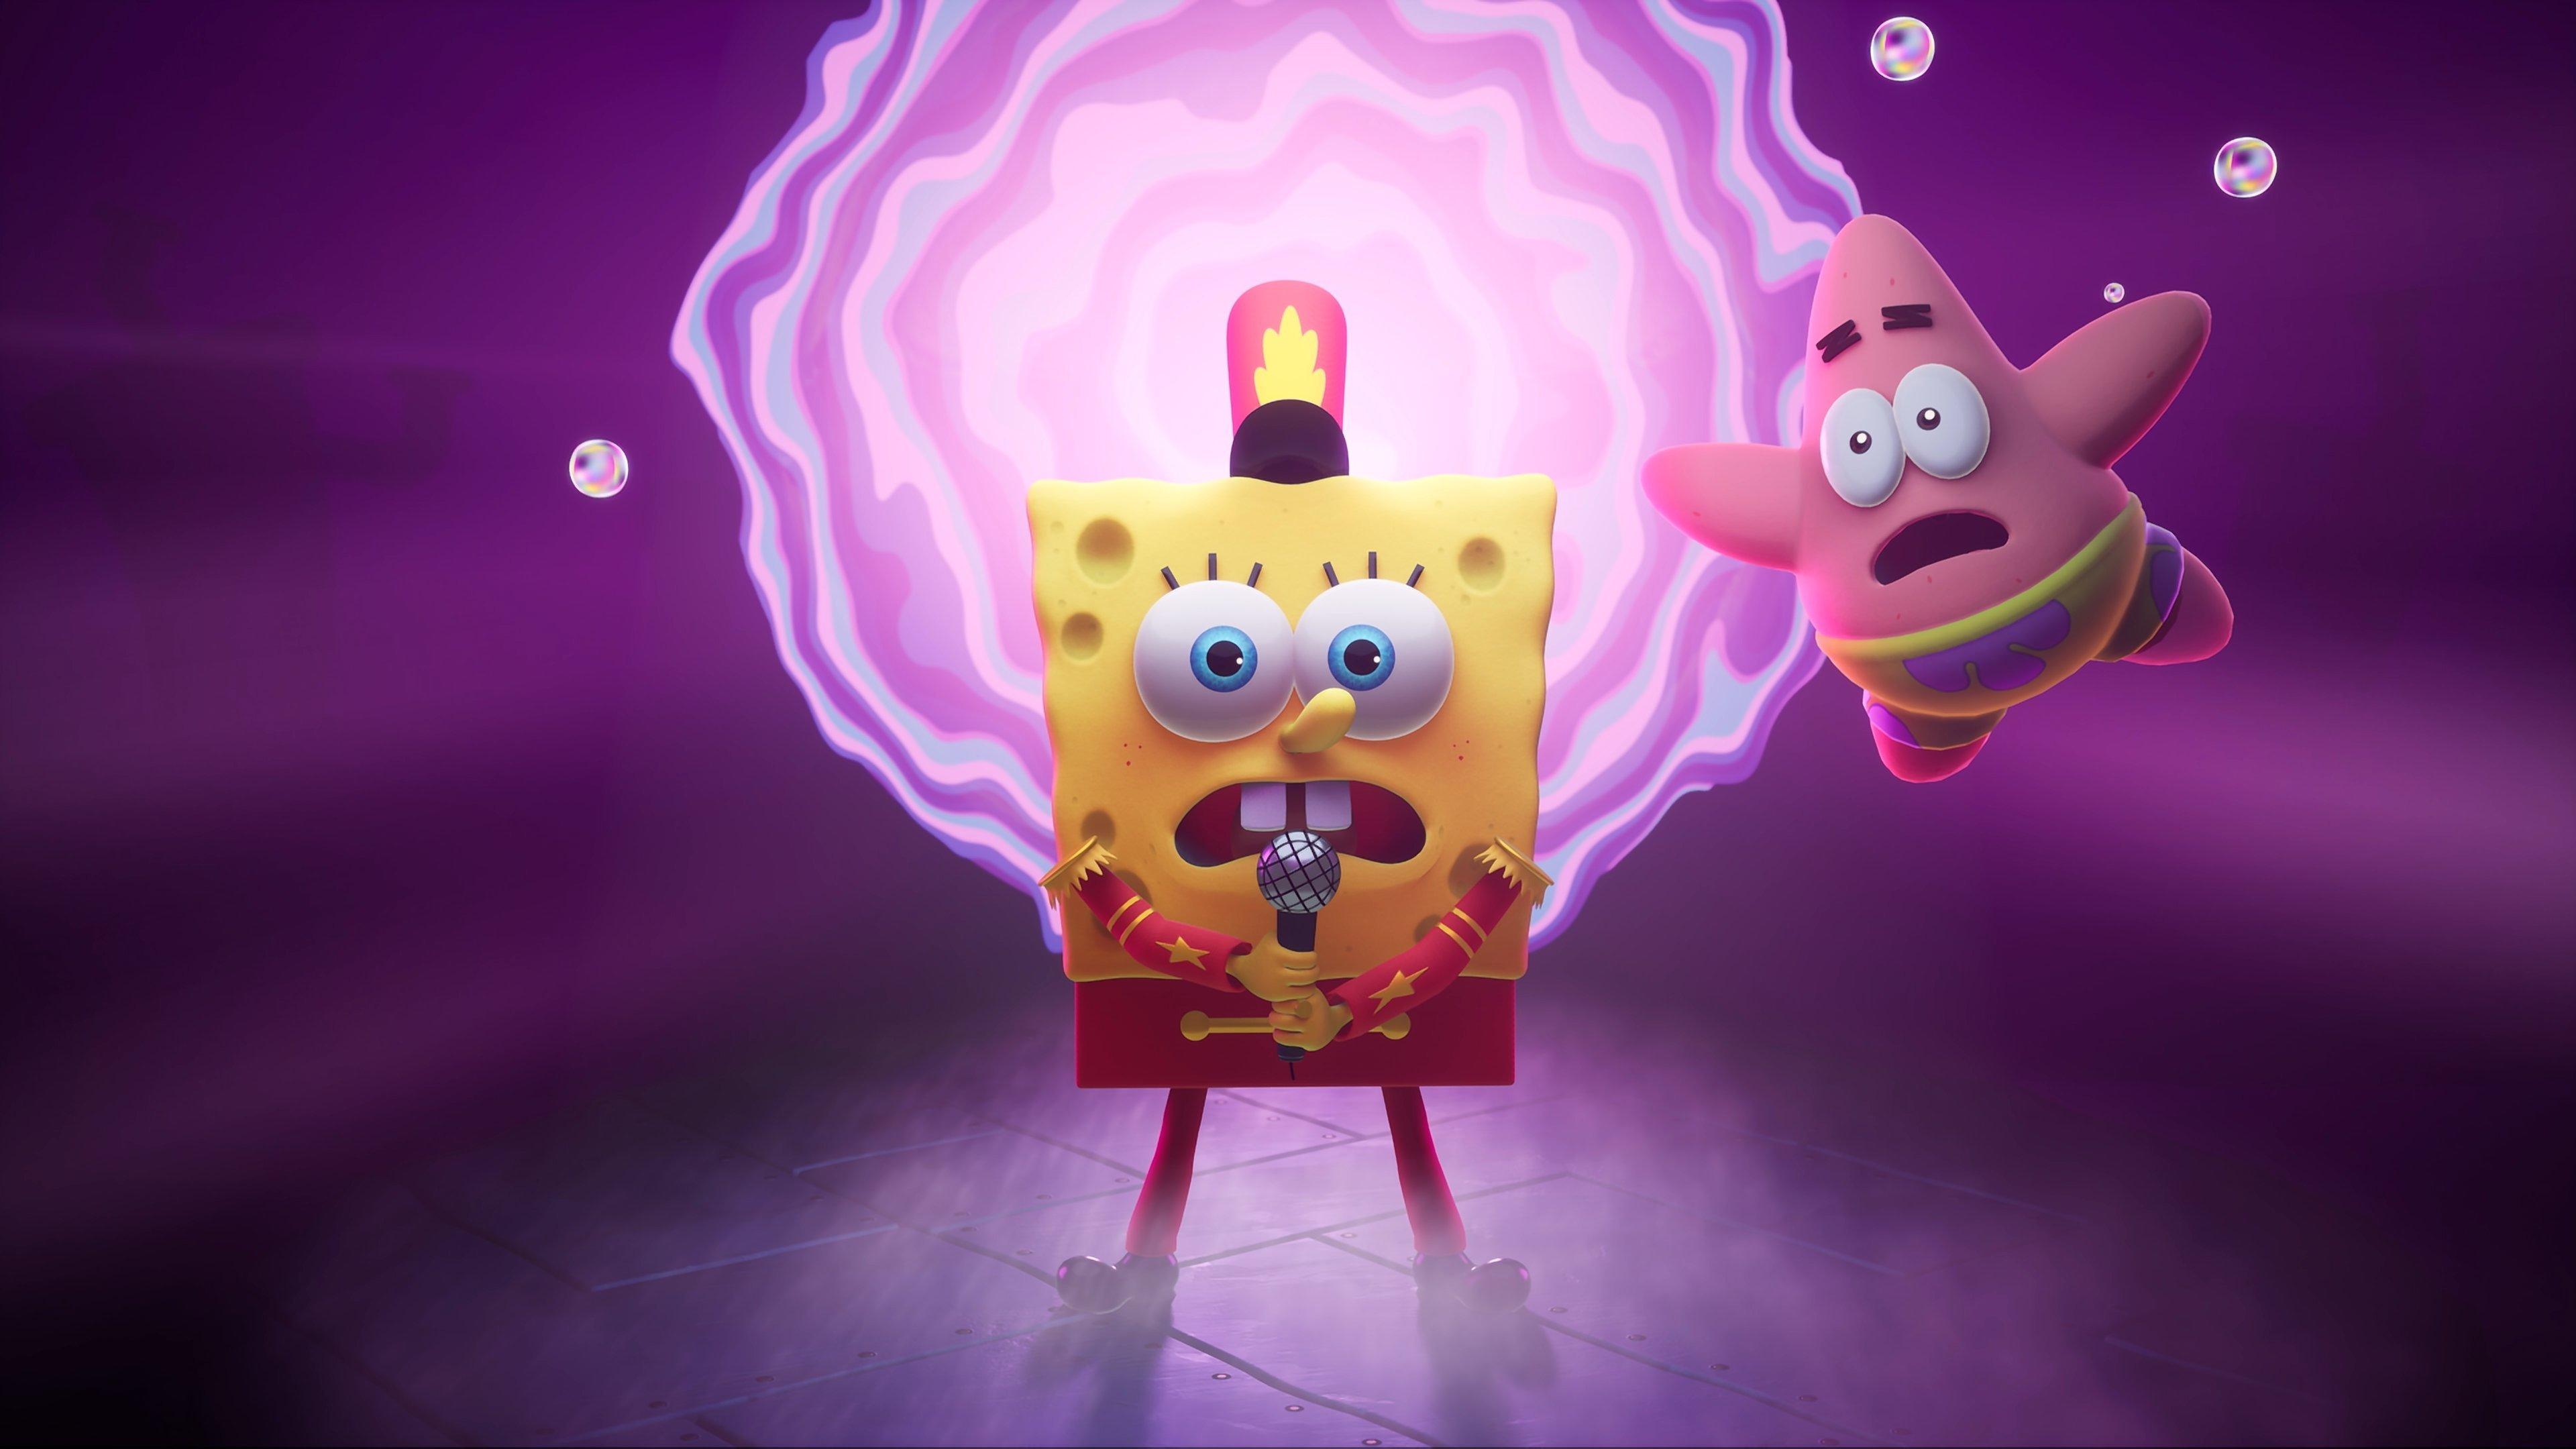 SpongeBob cast to perform virtual table read for new special